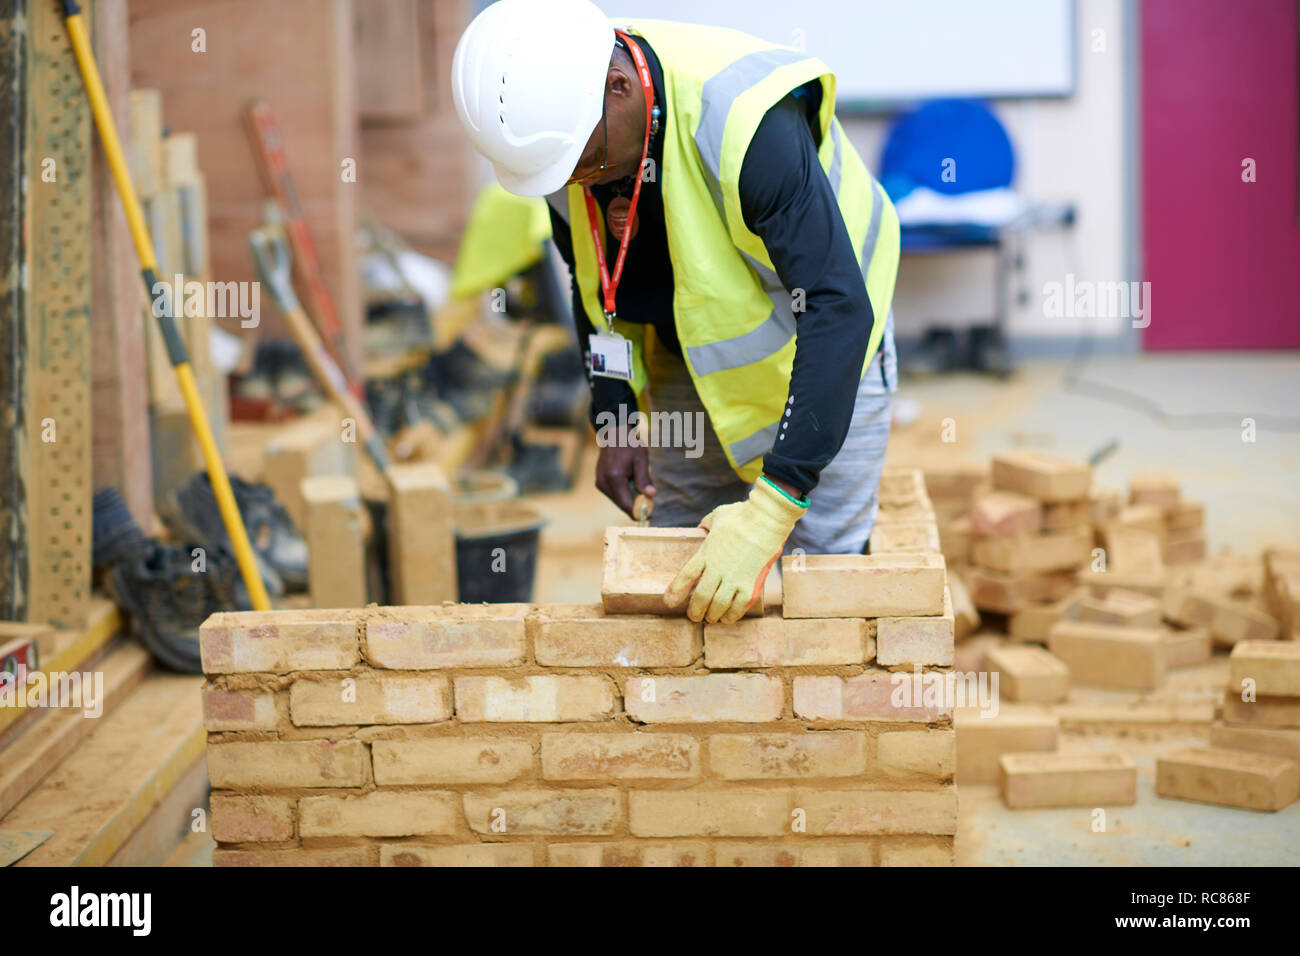 Lecturer building brick wall in classroom Stock Photo